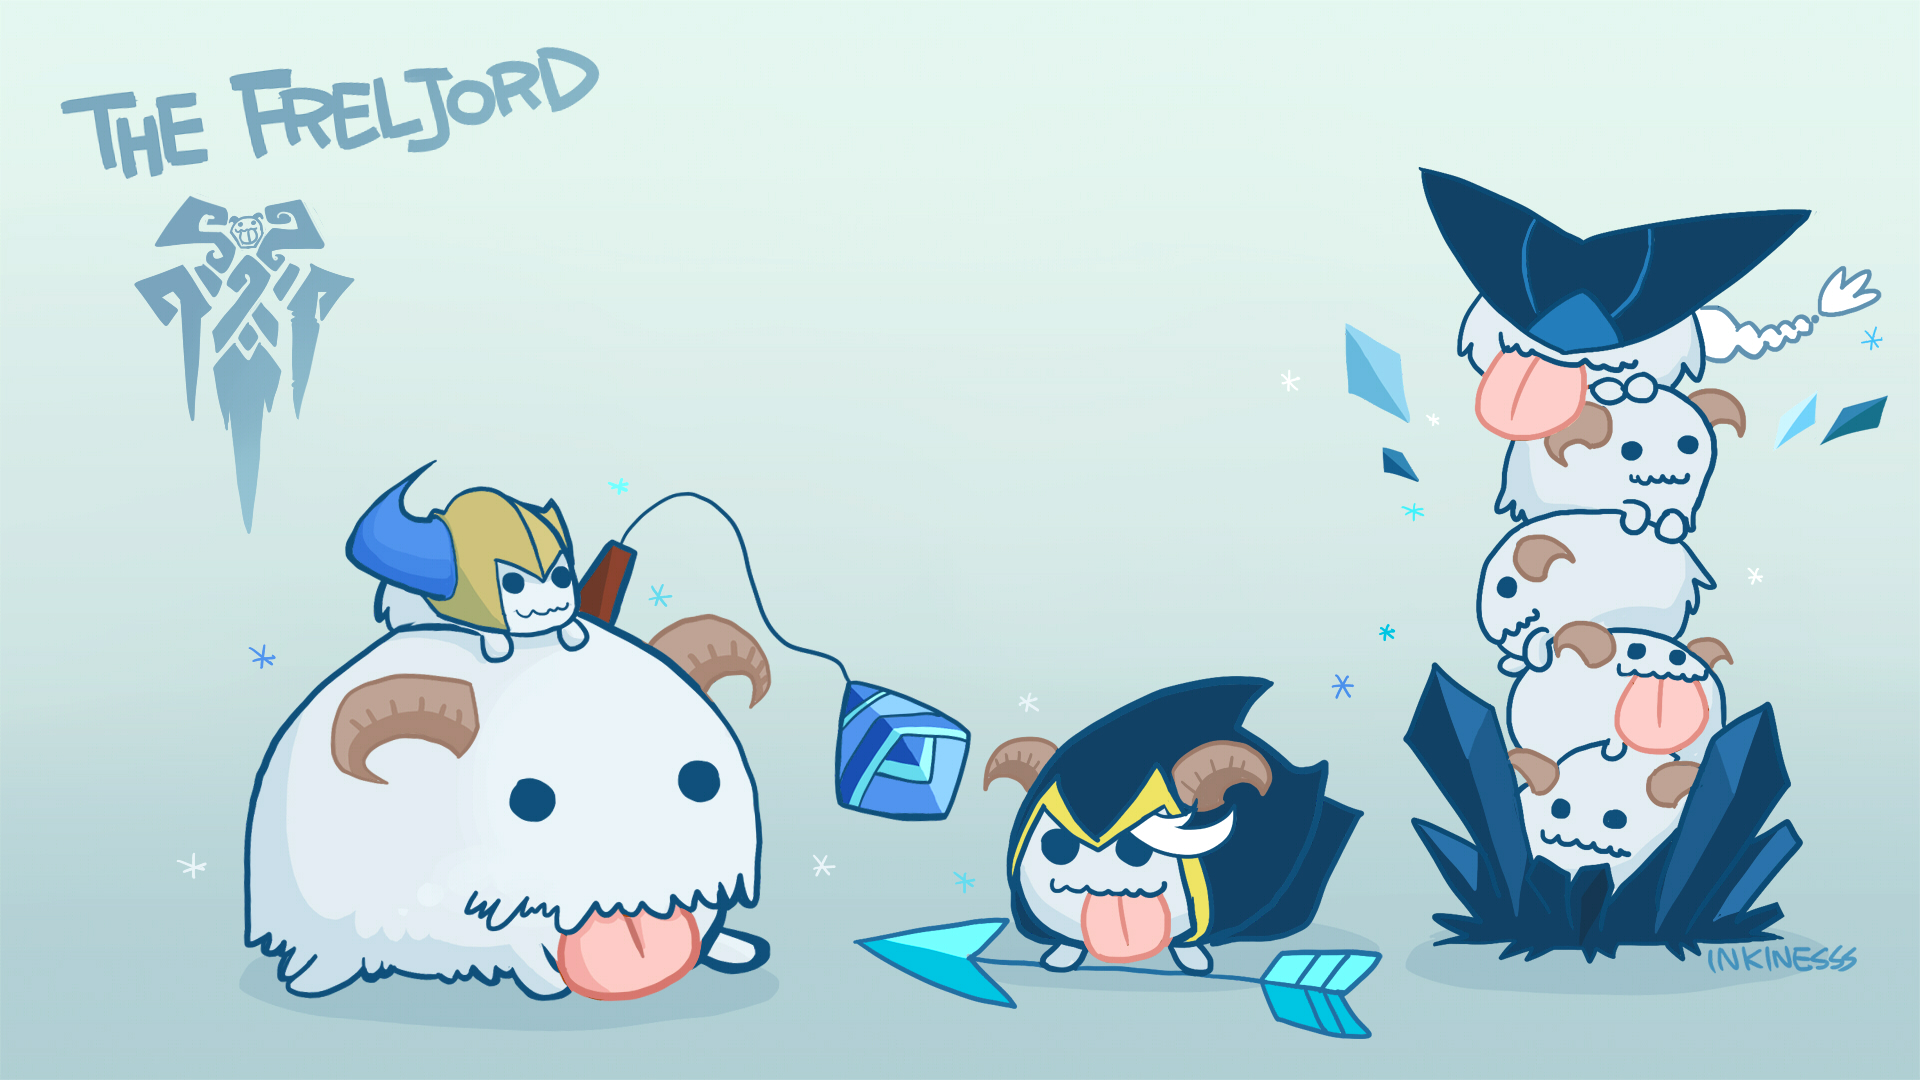 video game, league of legends, ashe (league of legends), lissandra (league of legends), poro, sejuani (league of legends)